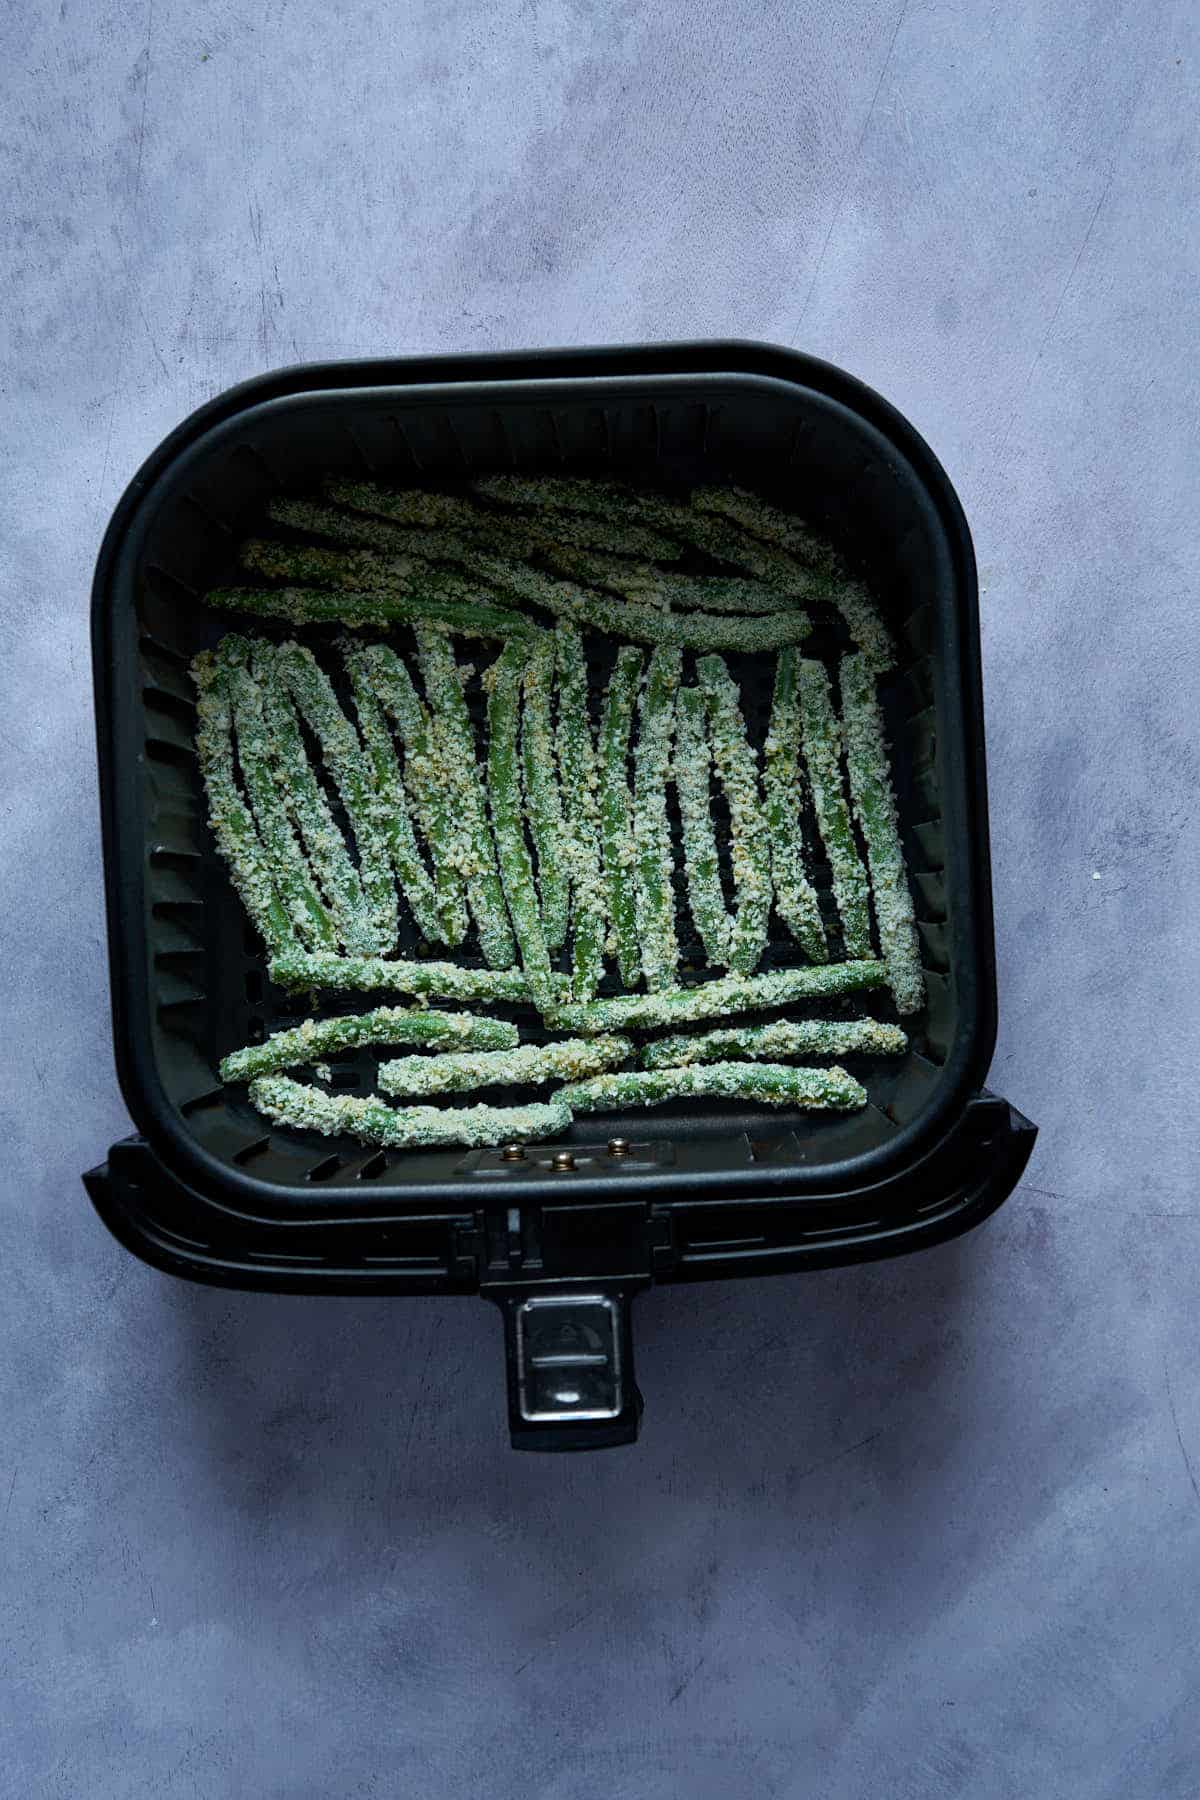 The green beans fries in the air fryer basket before air frying.